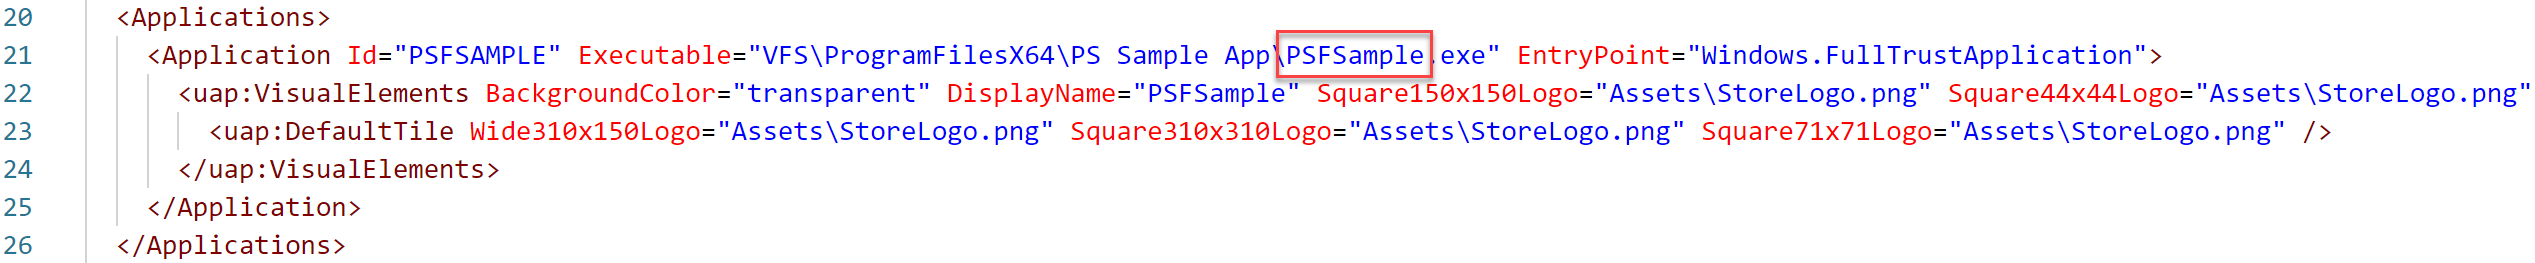 Image showing the location of the process executable within the AppxManifest file.